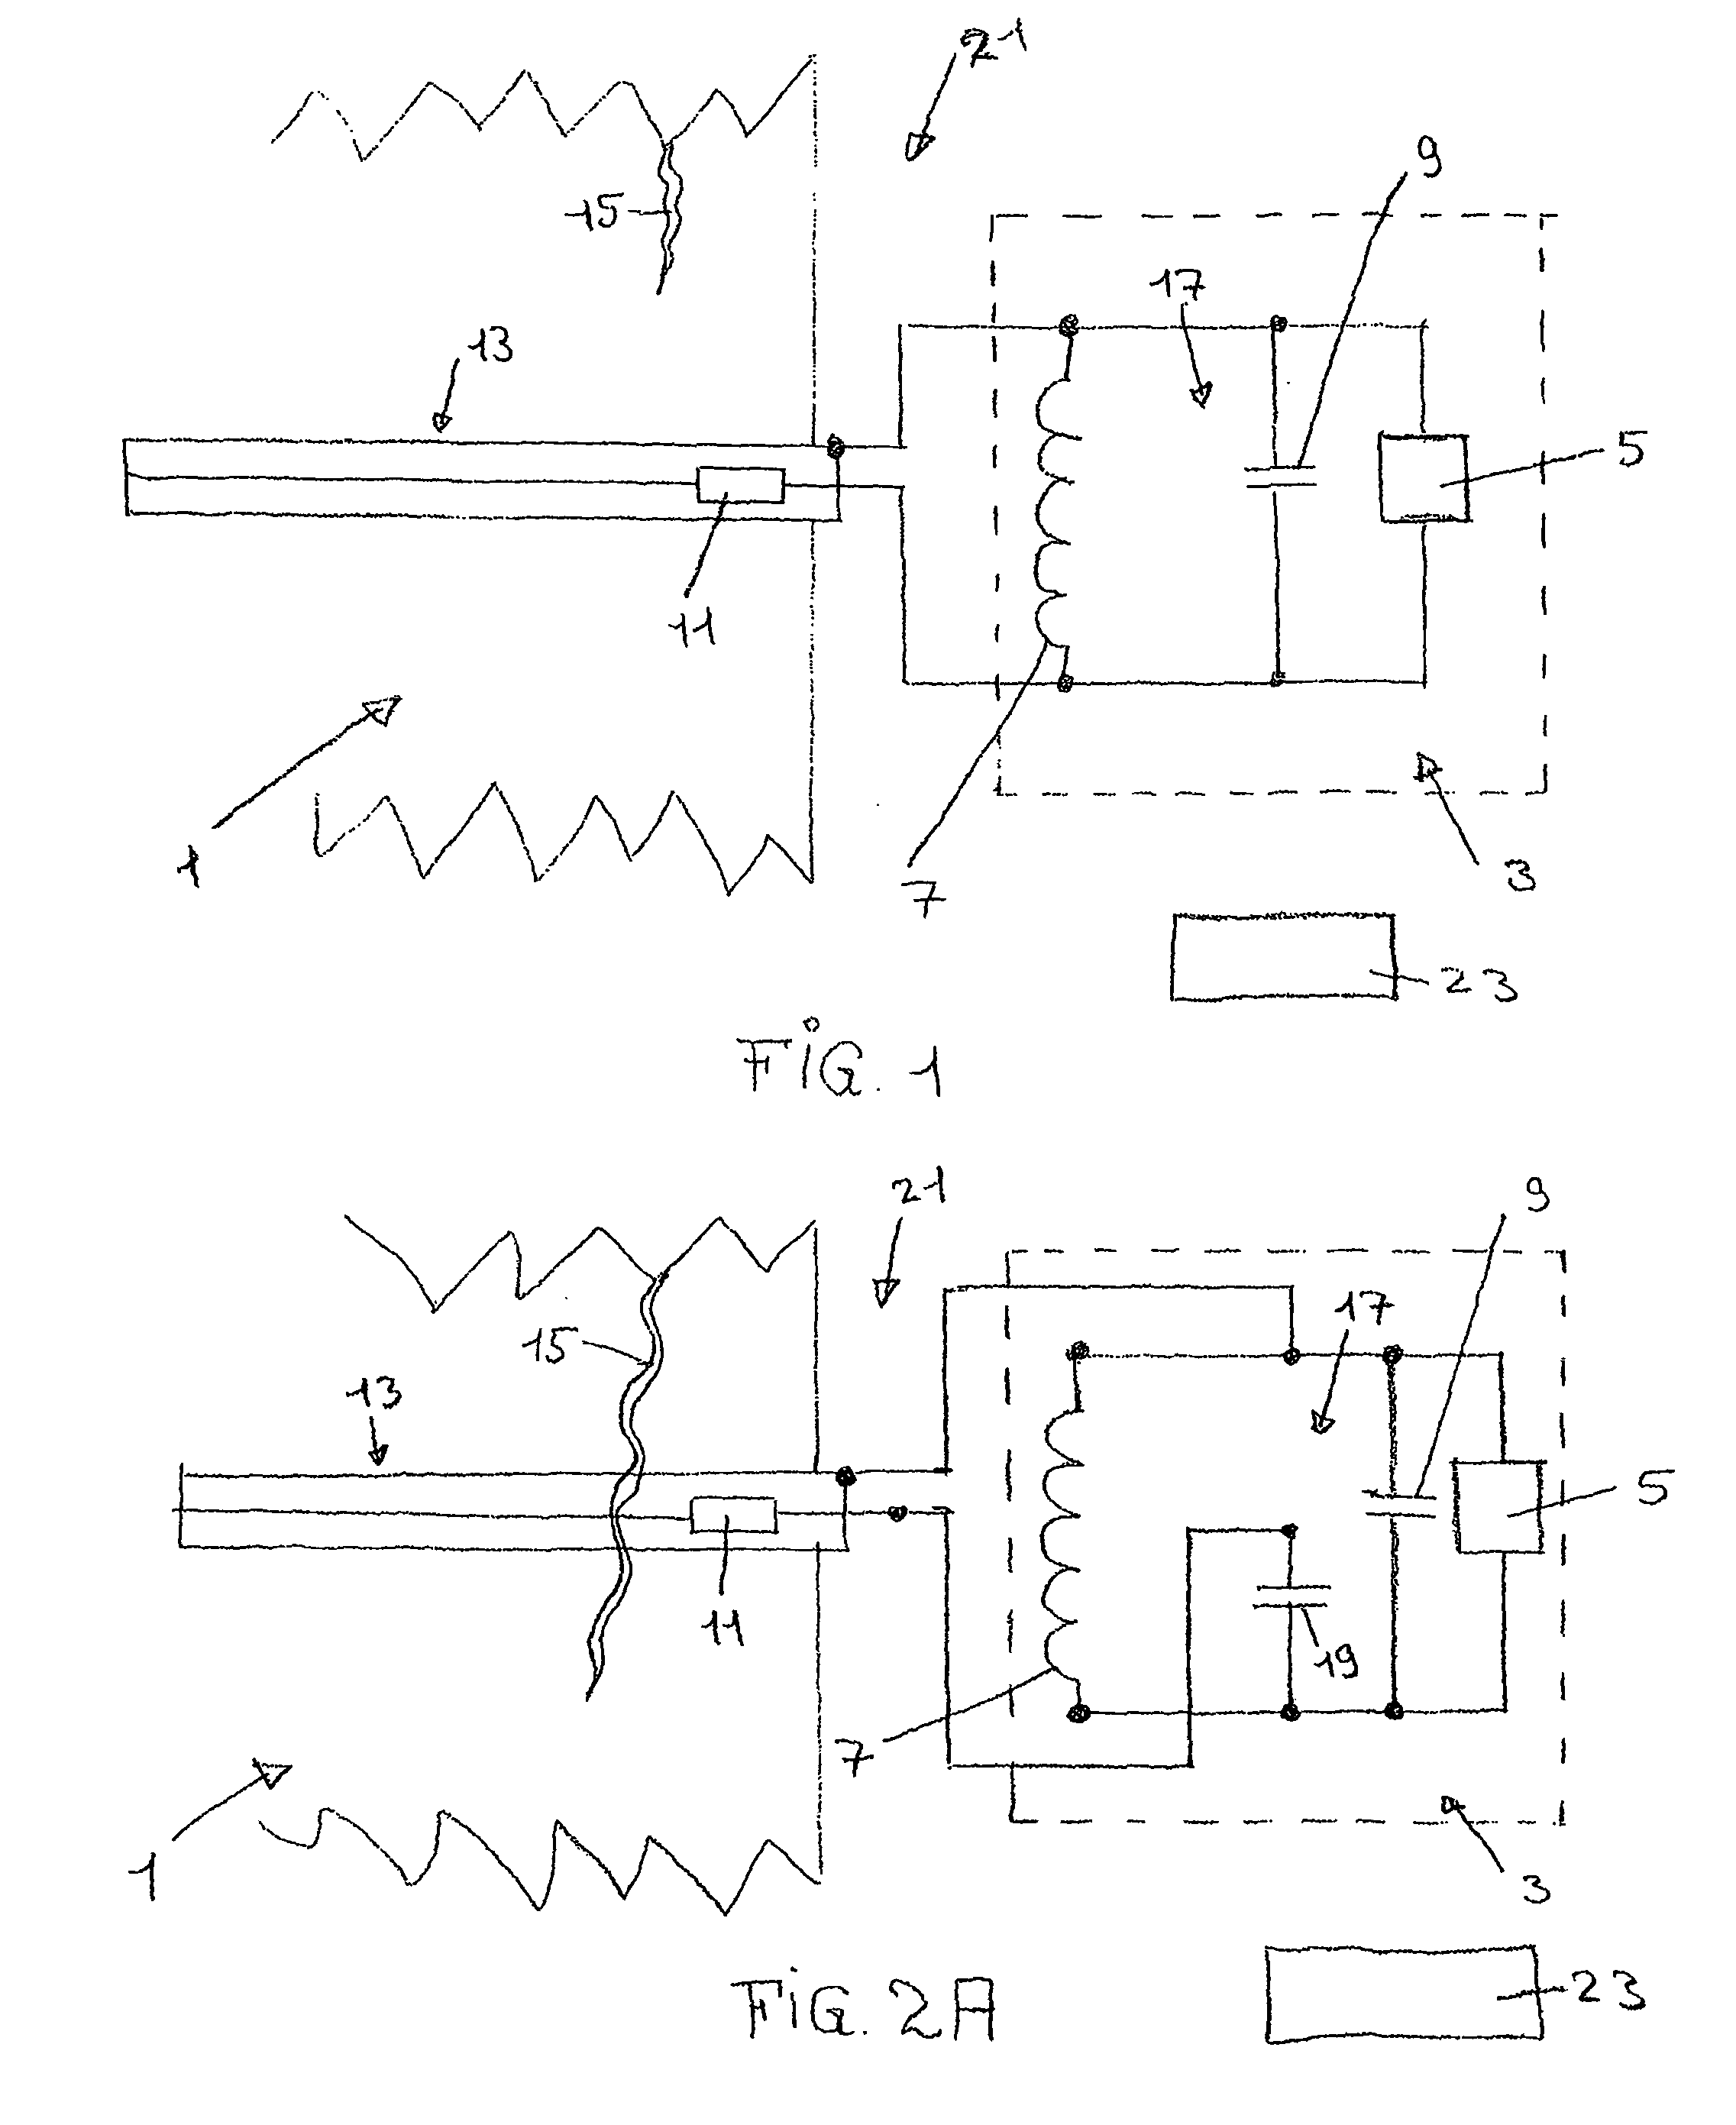 Irregularity detection in a structure of an aircraft